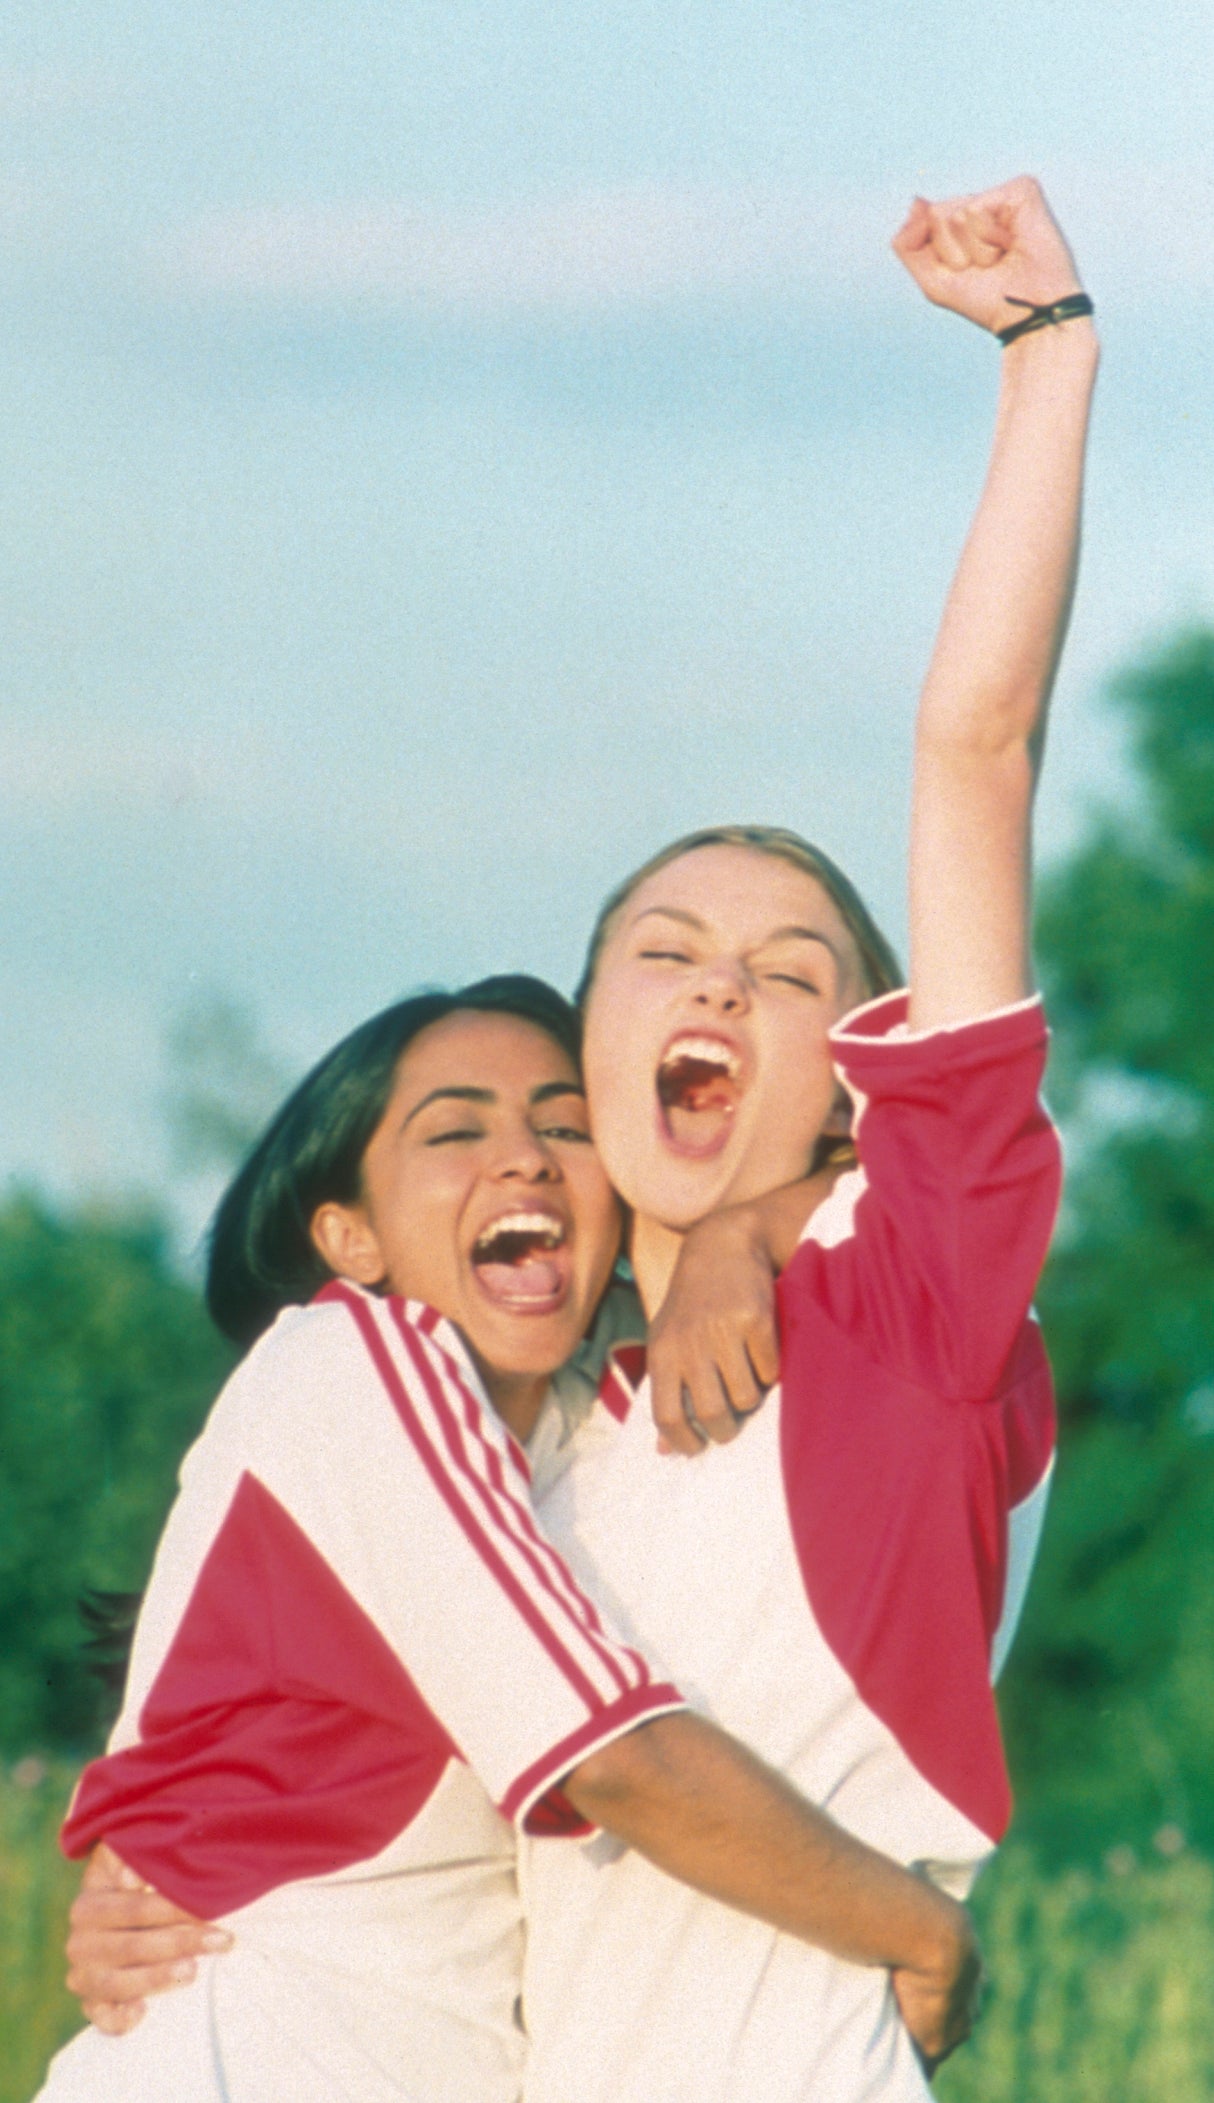 Parminder Nagra and Keira Knightley in ‘Bend It Like Beckham'